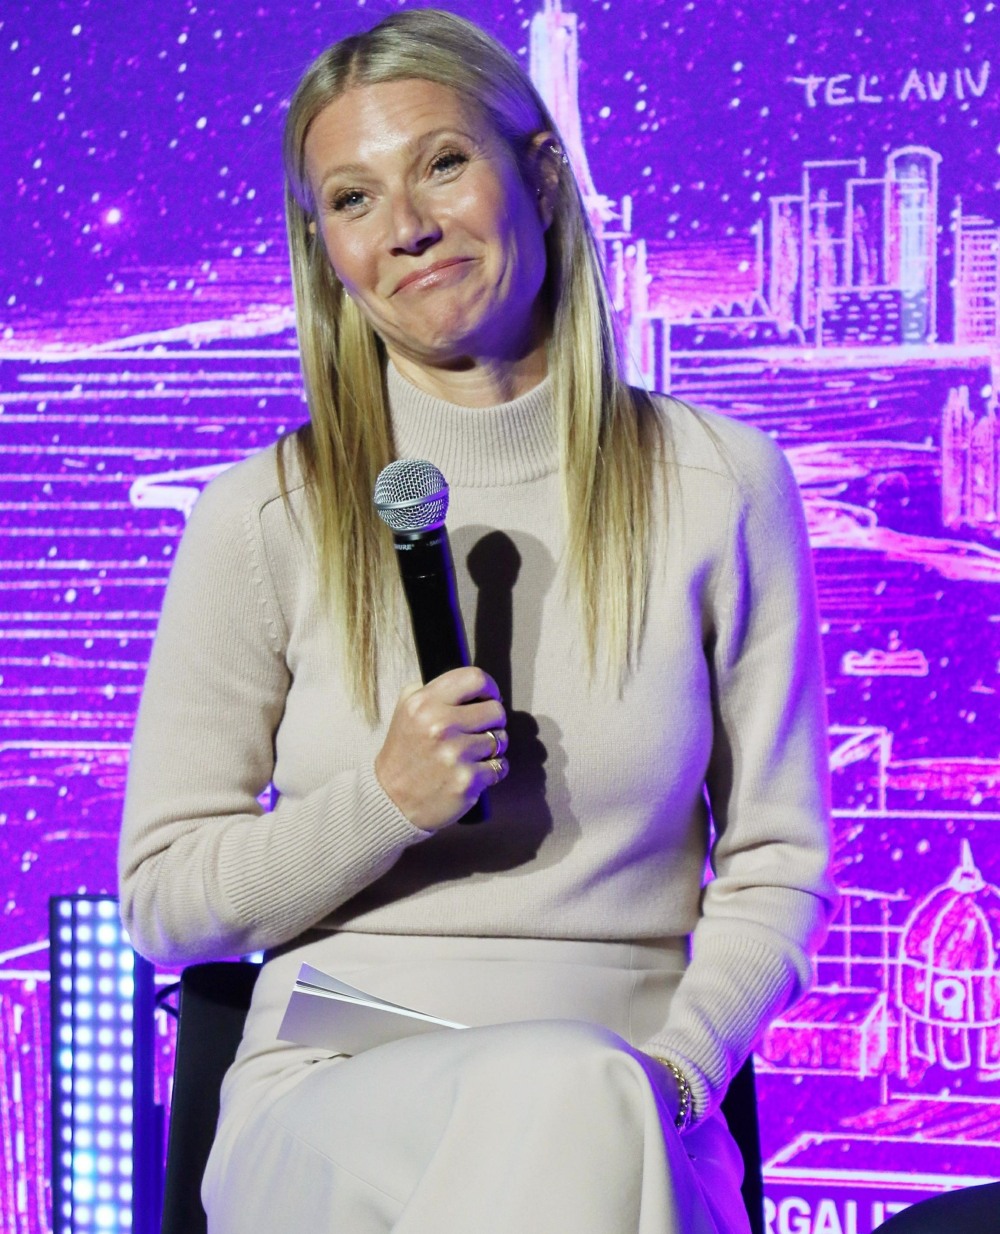 Gwyneth Paltrow at the Grand opening of the JVP International Cyber Center